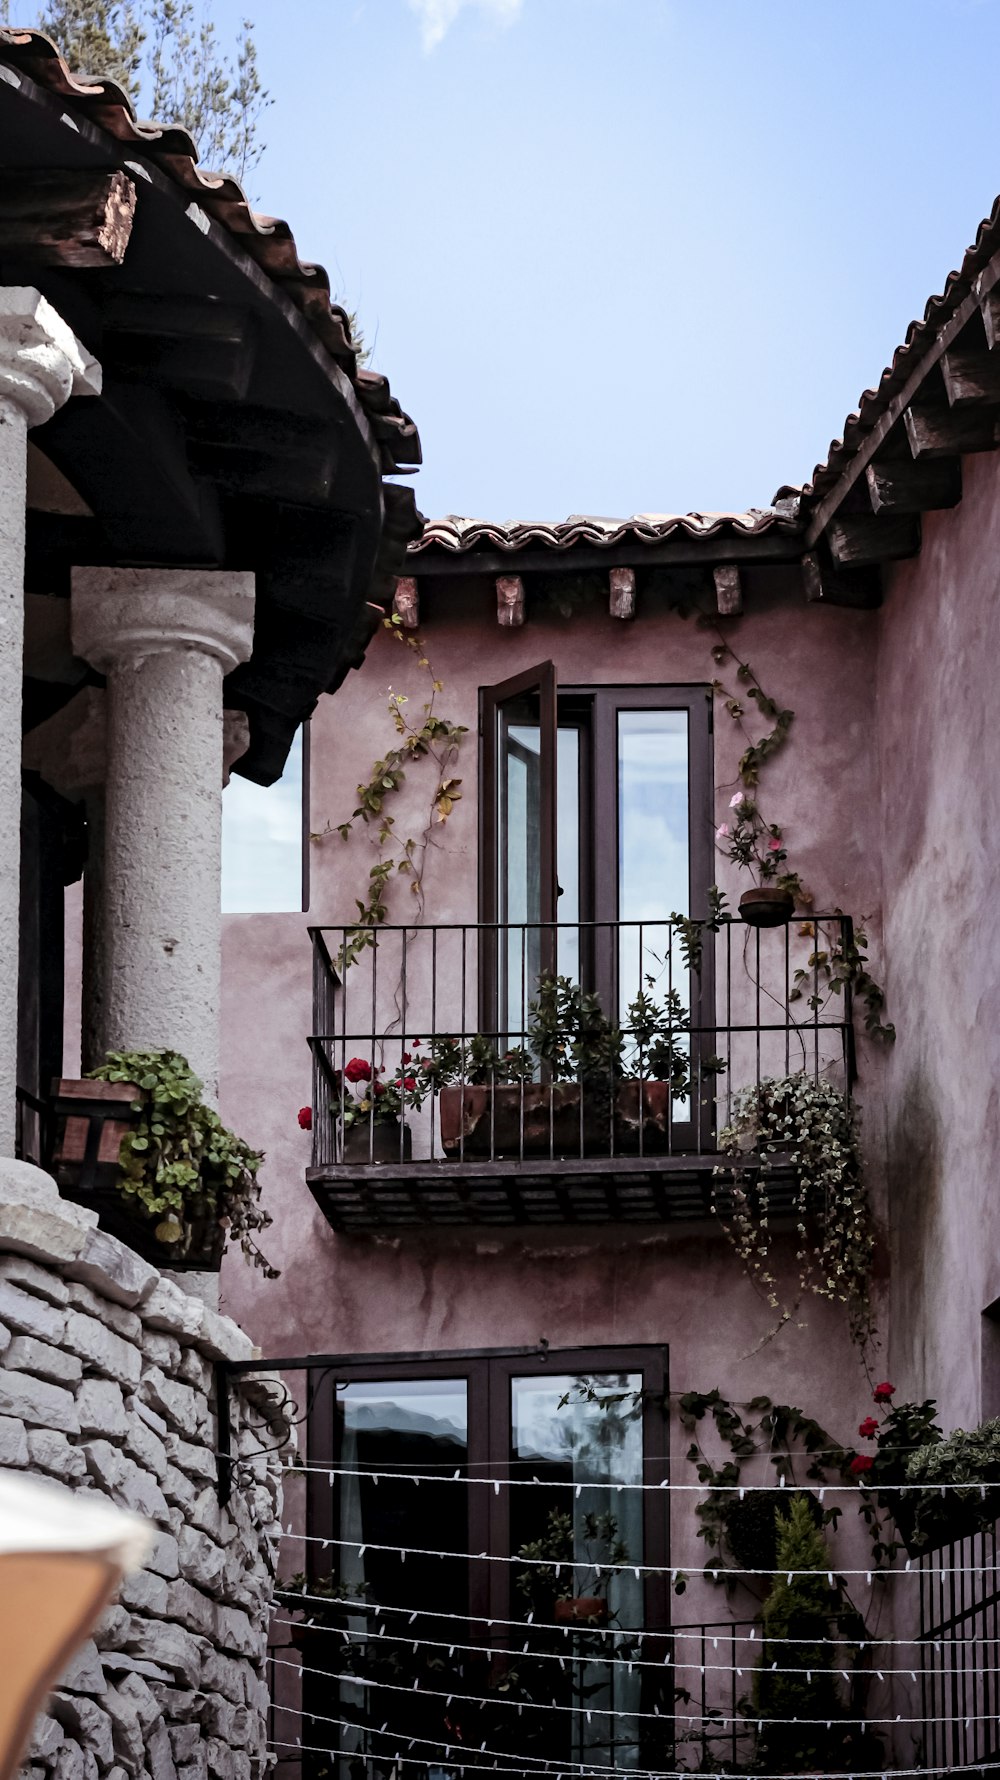 a pink building with a balcony and flowers on the balconies